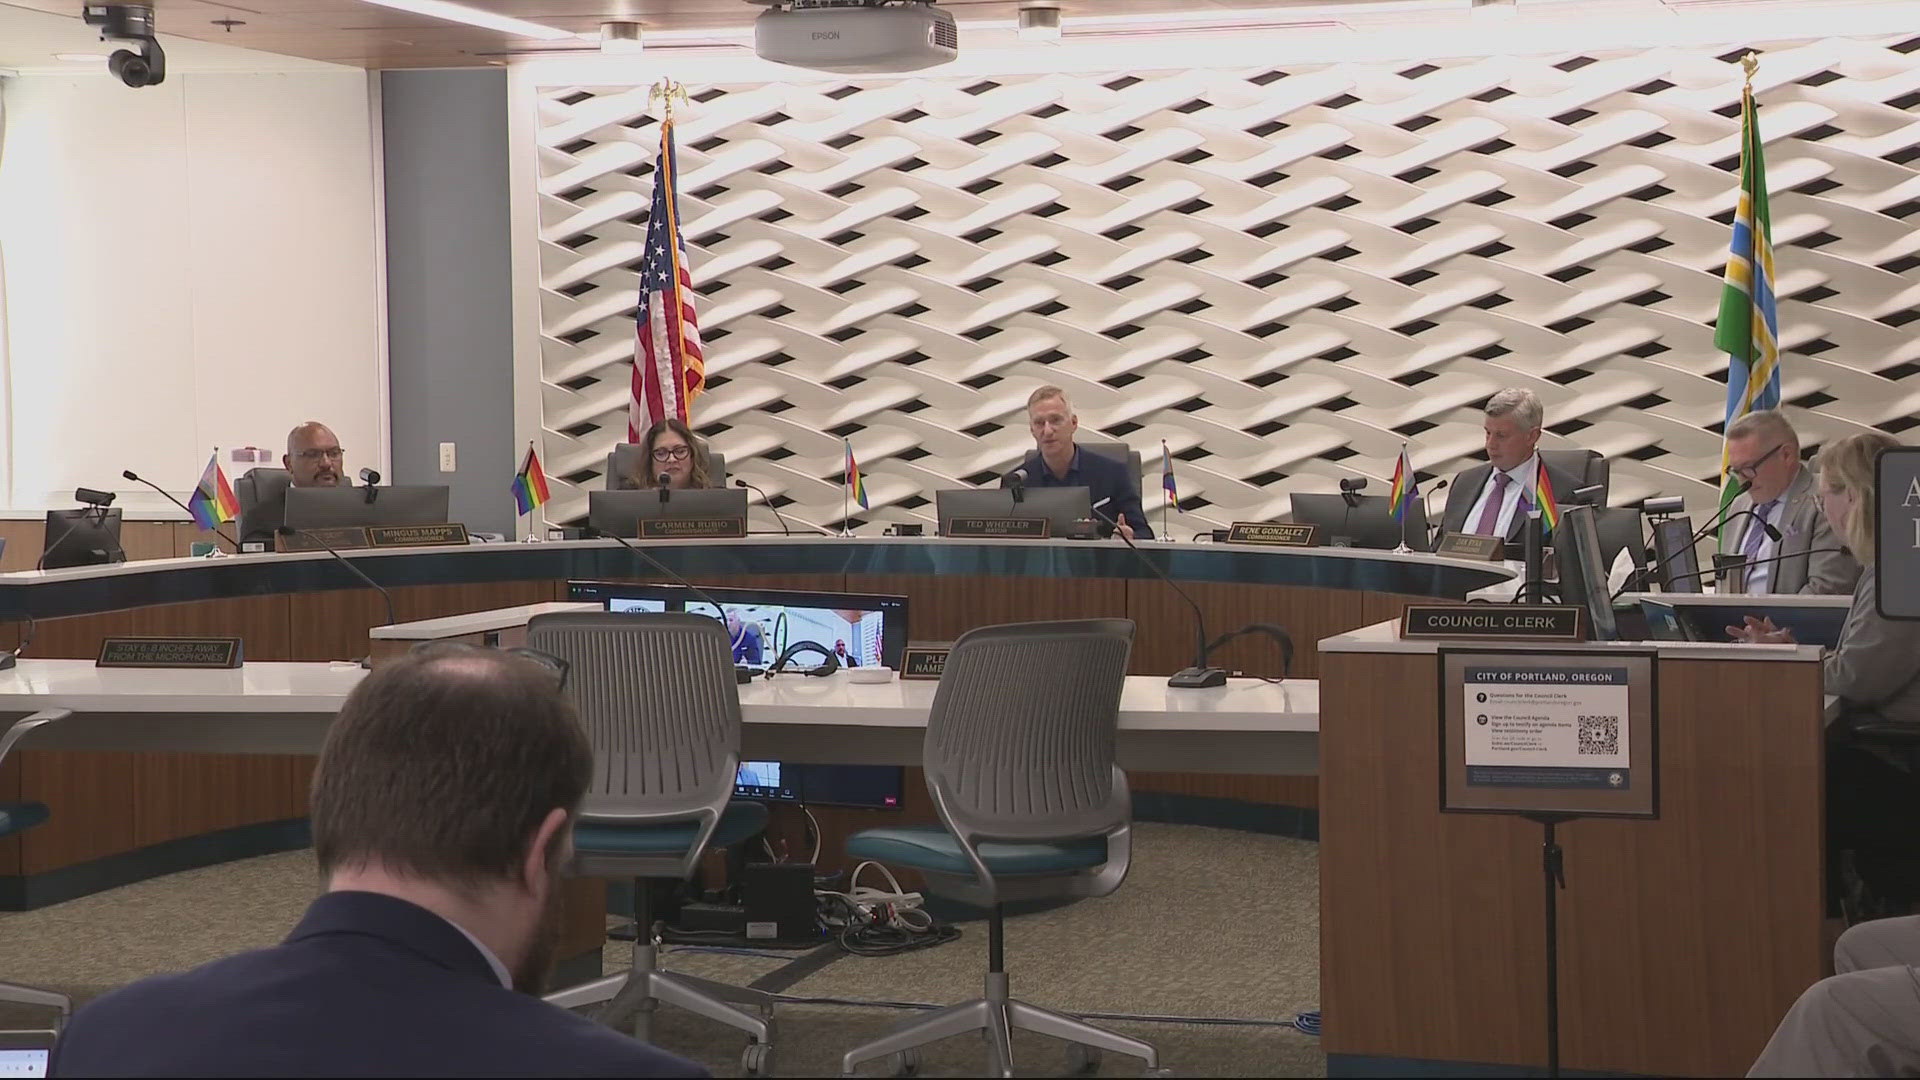 The city is deciding whether or not to continue sending millions of taxpayer dollars to the Joint Office of Homeless Services, with most commissioners skeptical.